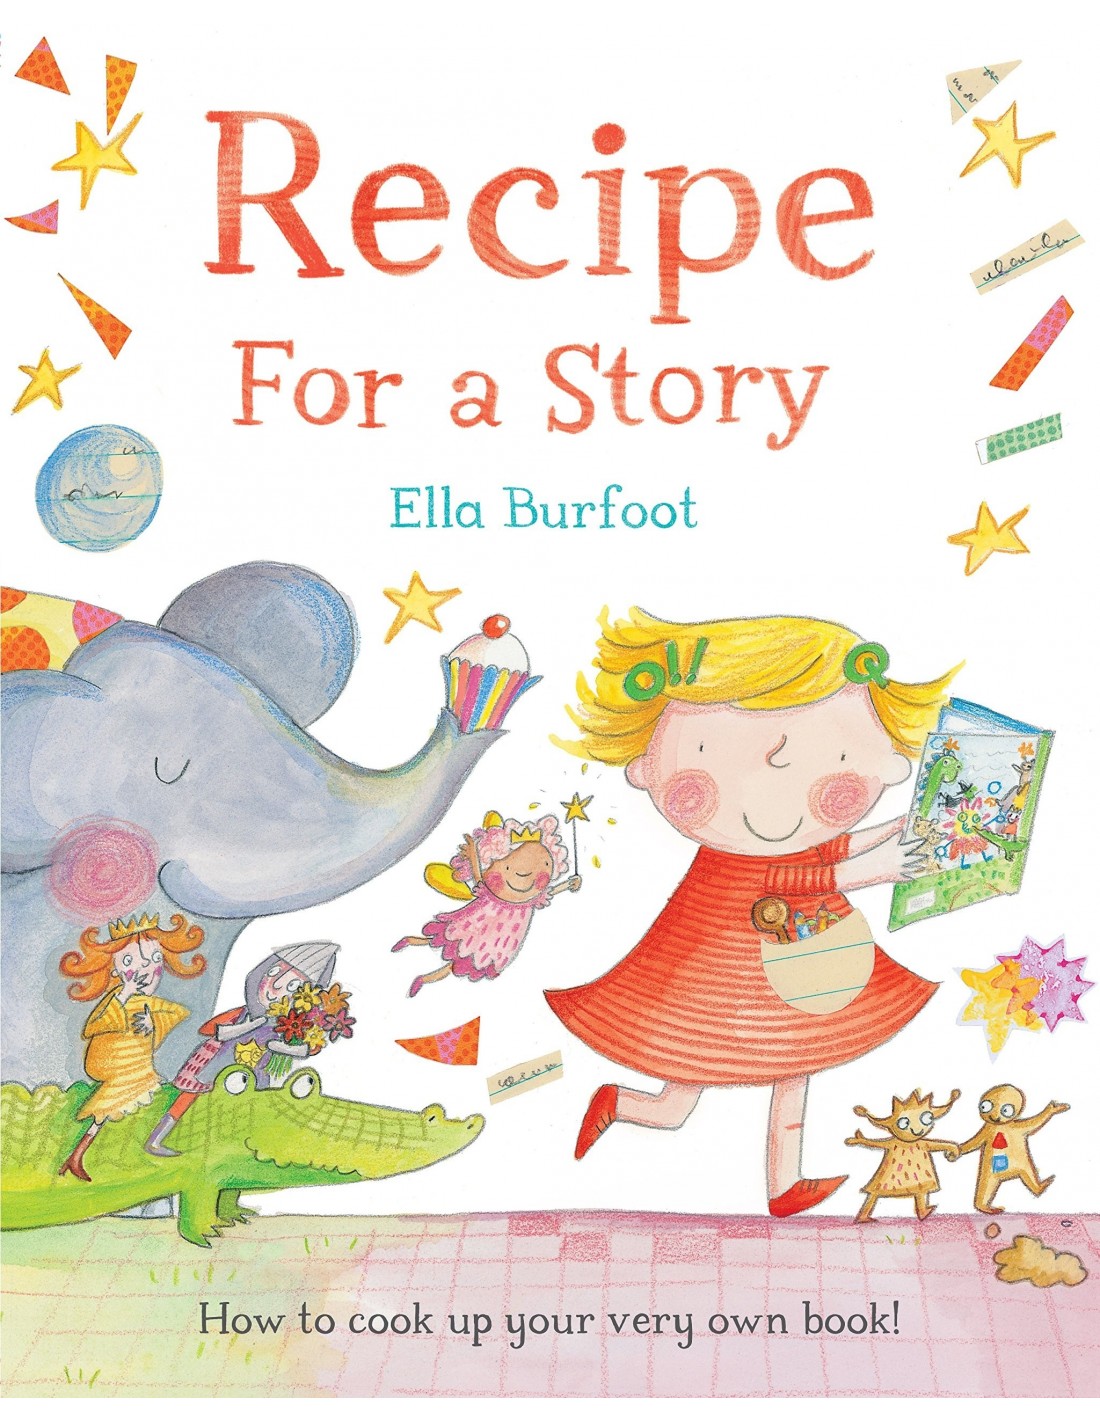 Recipe For a Story